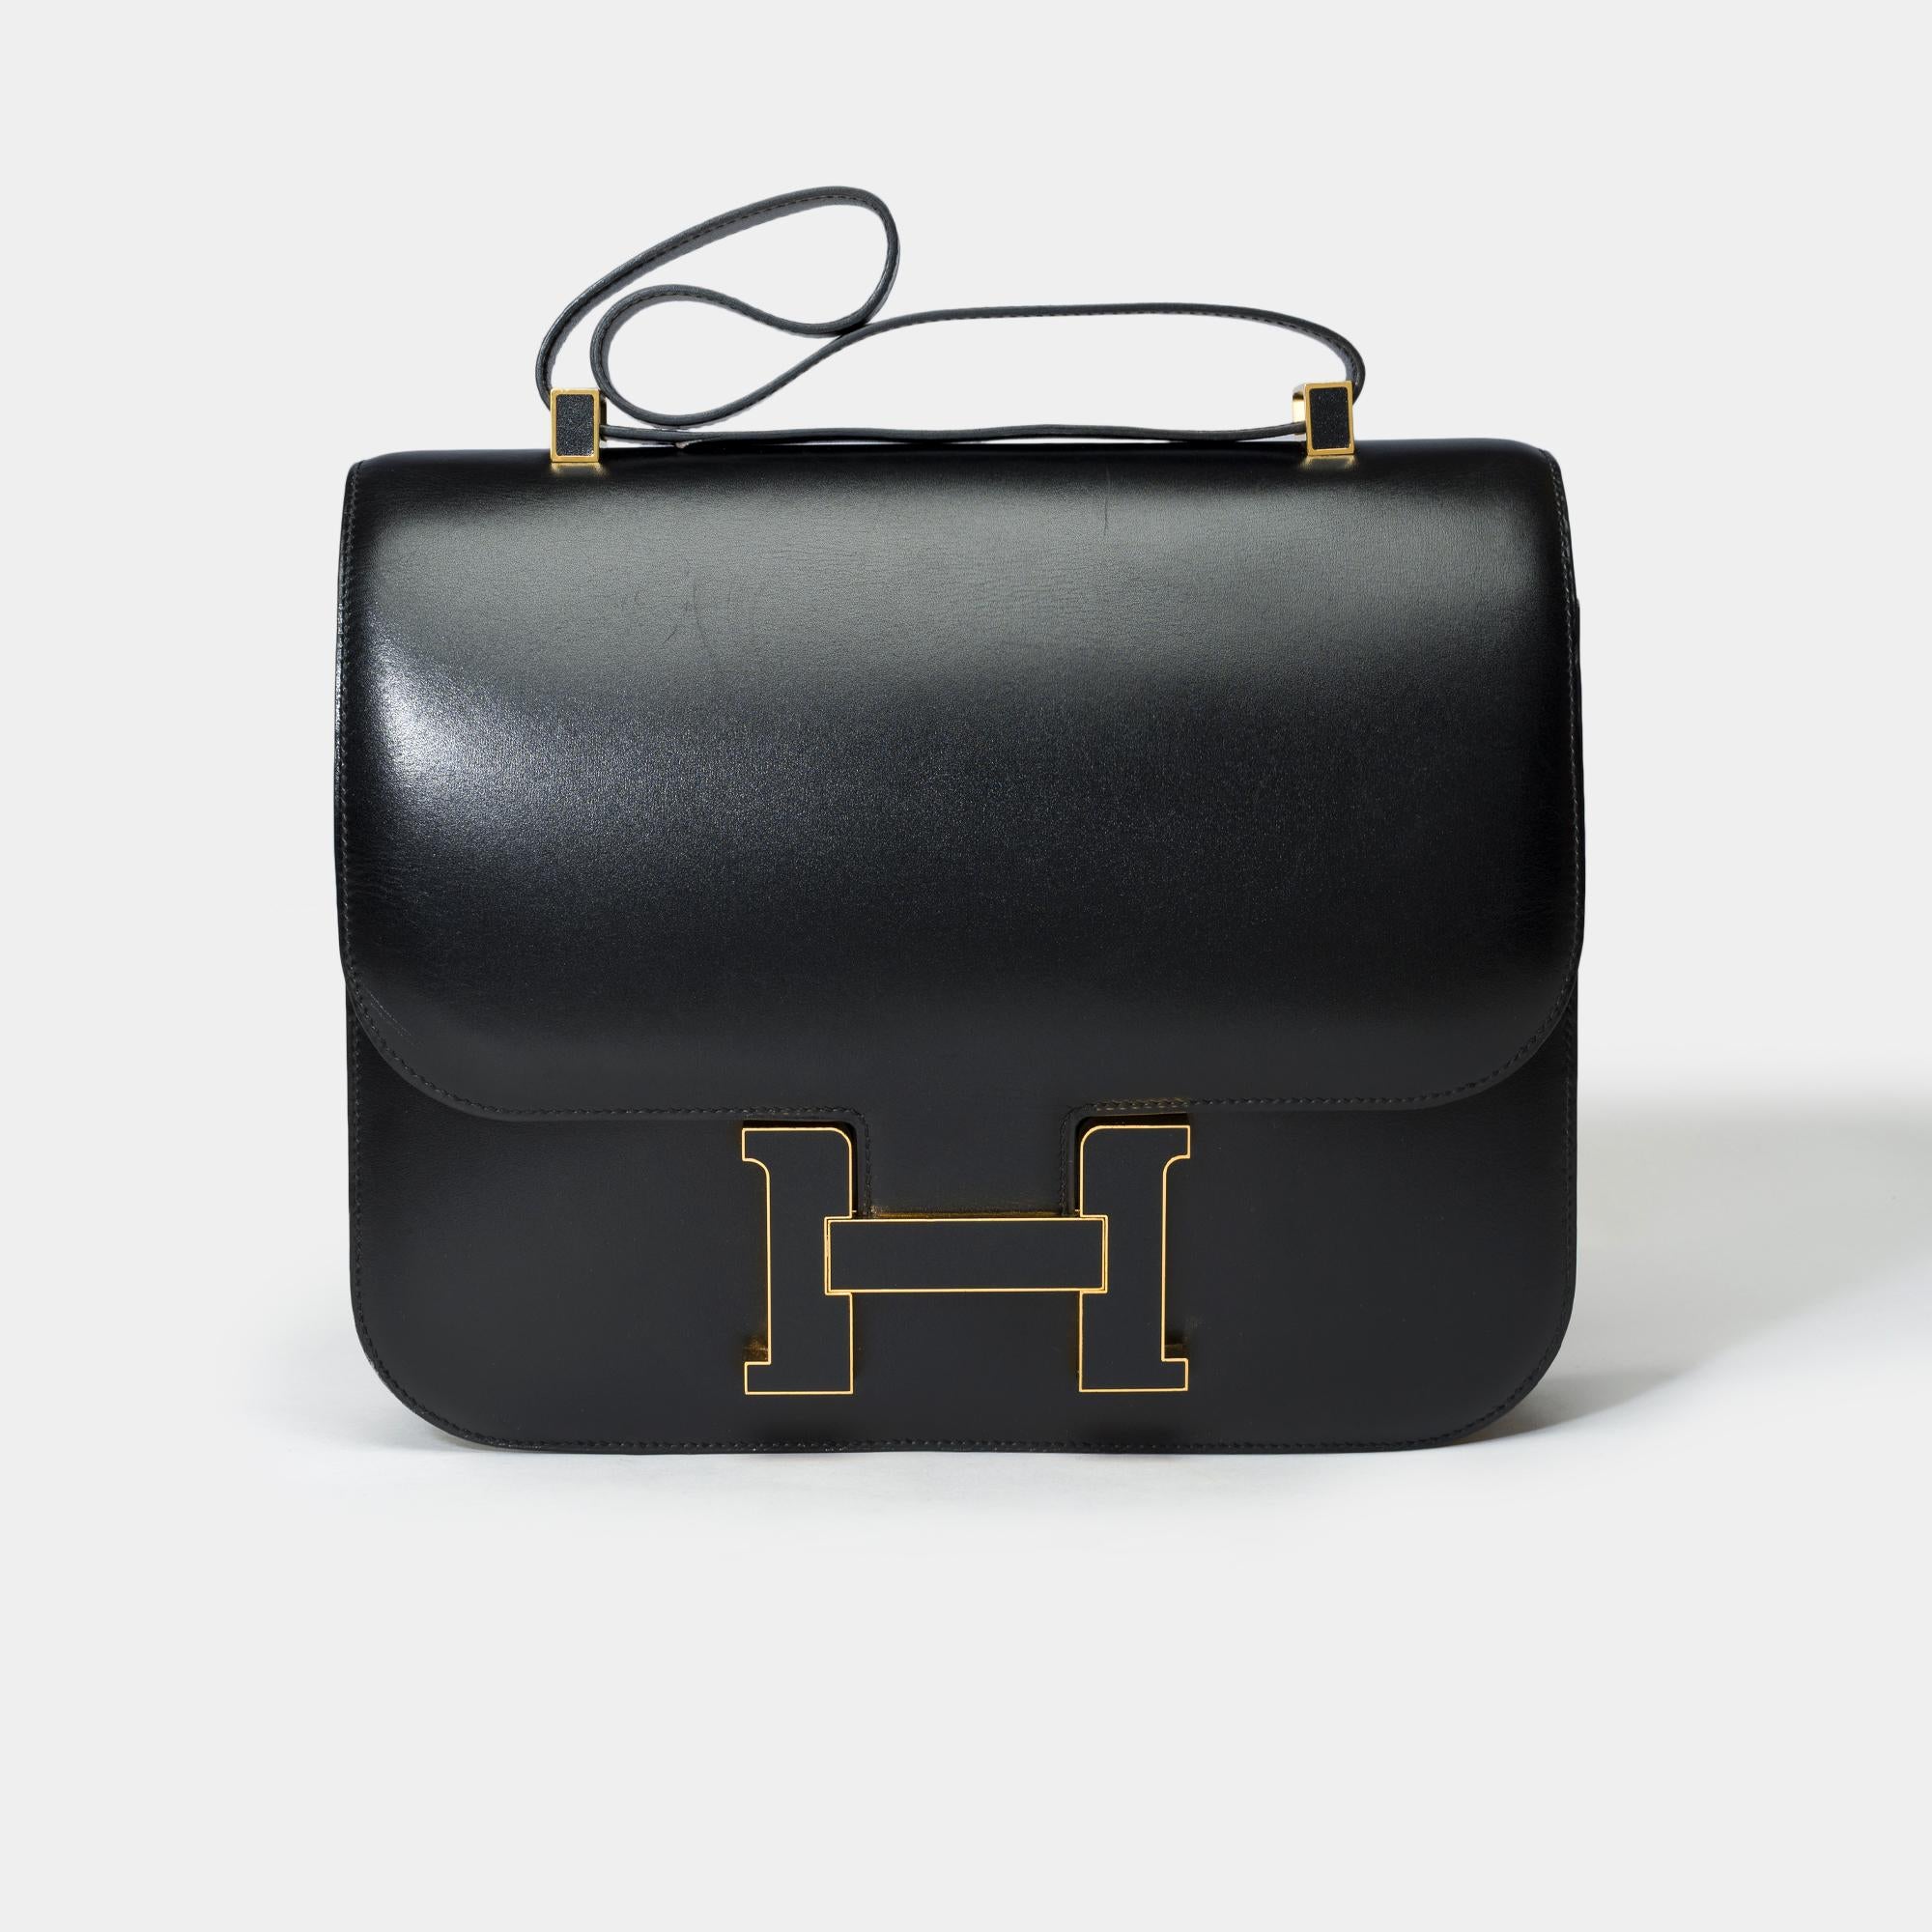 Extremely​ ​Rare​ ​and​ ​sought​ ​after​ ​Limited​ ​edition​ ​Hermès​ ​Constance​ ​Cartable​ ​shoulder​ ​bar​ ​in​ ​black​ ​box​ ​calfskin​ ​leather,​ ​​ ​​ ​gold​ ​plated​ ​metal​ ​trim,​ ​a​ ​black​ ​box​ ​leather​ ​handle​ ​for​ ​a​ ​hand​ ​or​